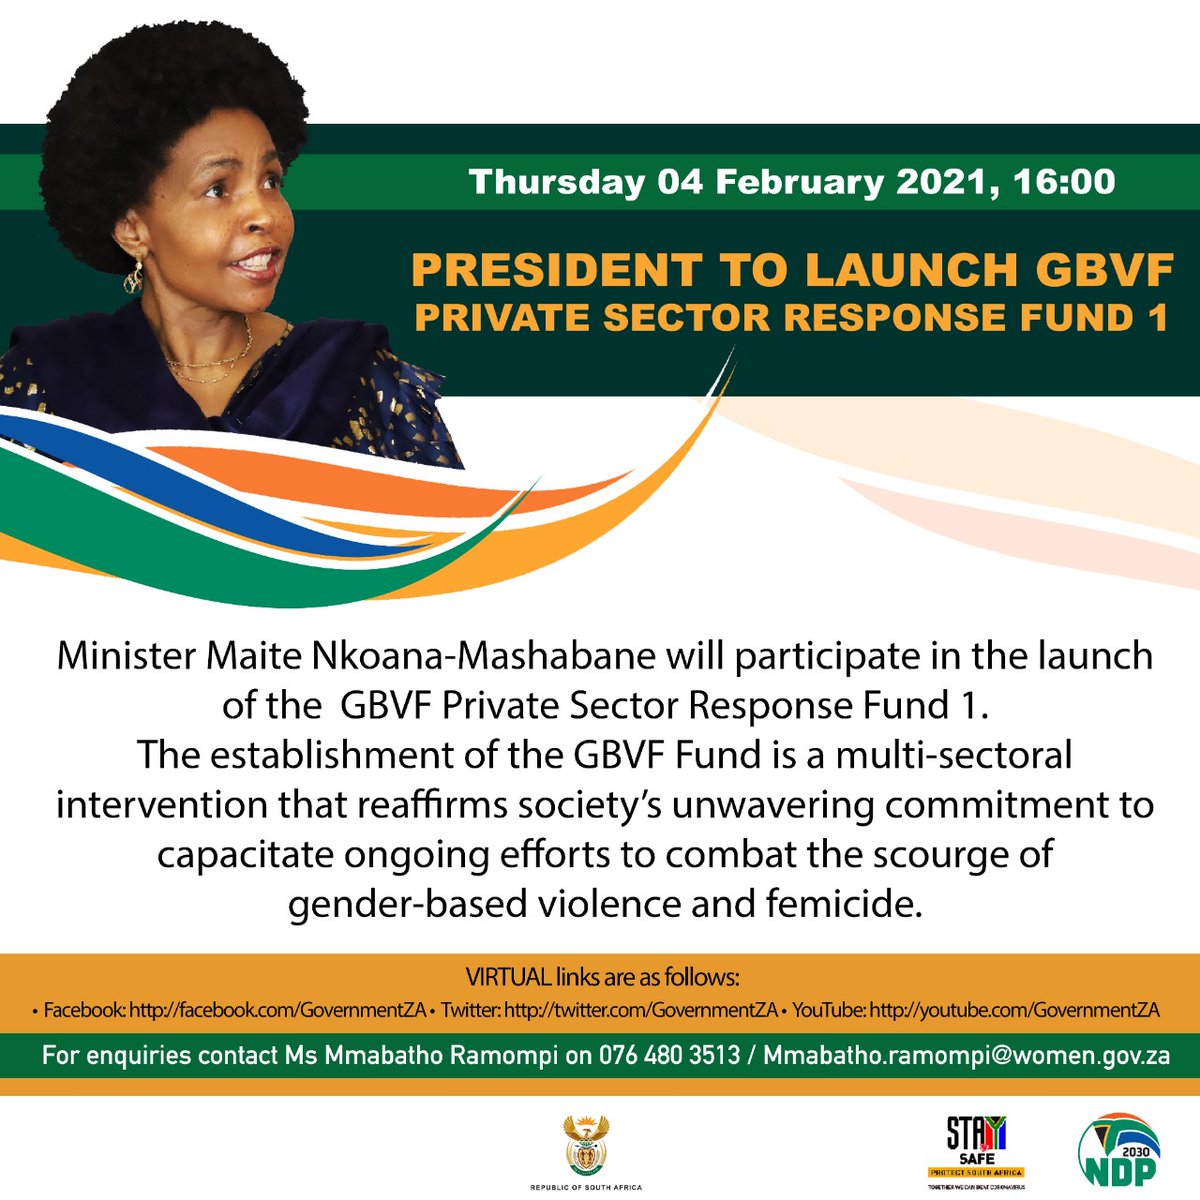 Today, the 4th February 2021, I will be participating in the launch of #GBVF private sector response fund 1. The establishment of the fund is multi-sectoral intervention that reaffirms society's unwavering commitment to capacitate ongoing efforts to combat the scourge of GBVF